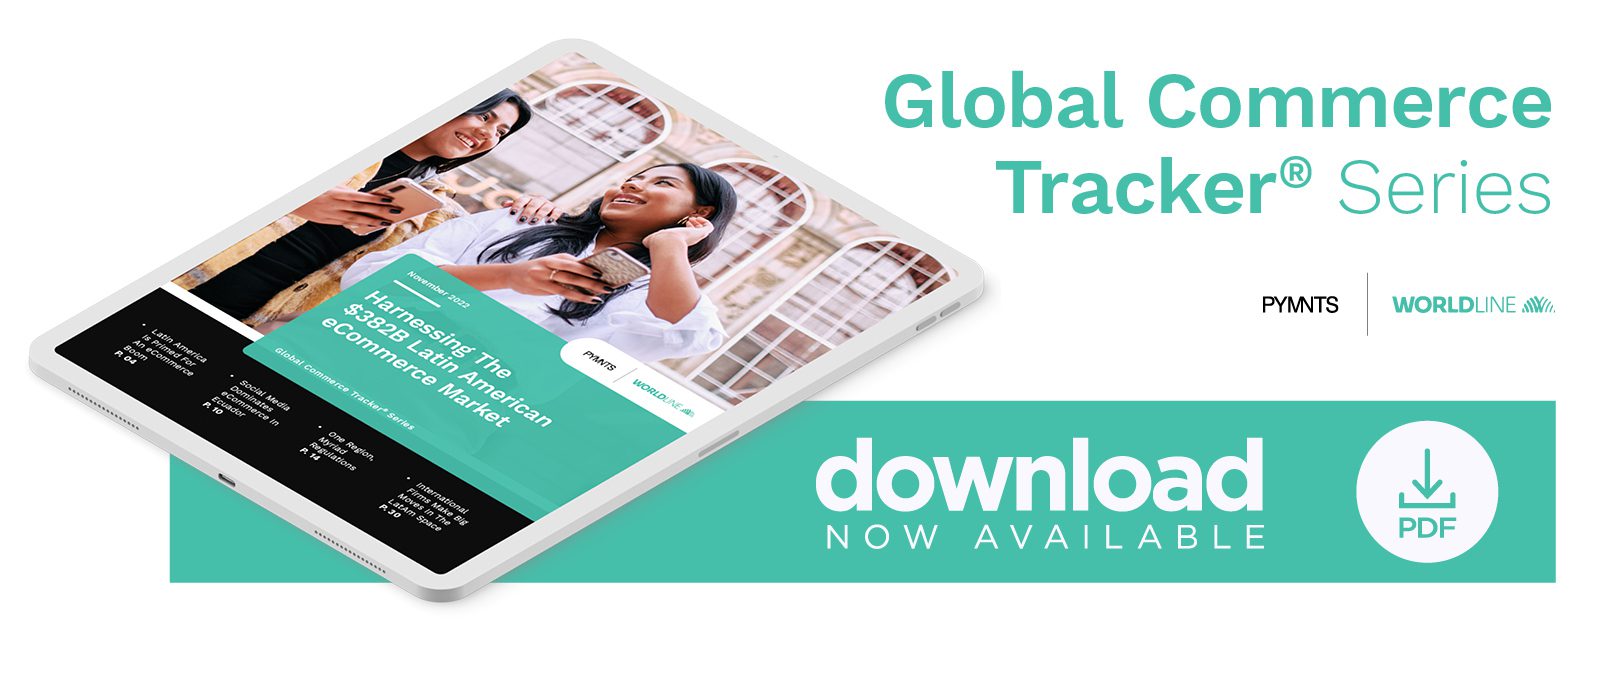 Worldline - Global Commerce Tracker: Harnessing The $382B Latin American eCommerce Market - November 2022 - Learn more about the burgeoning Latin American eCommerce market and what merchants looking to invest there need to know to succeed in the region